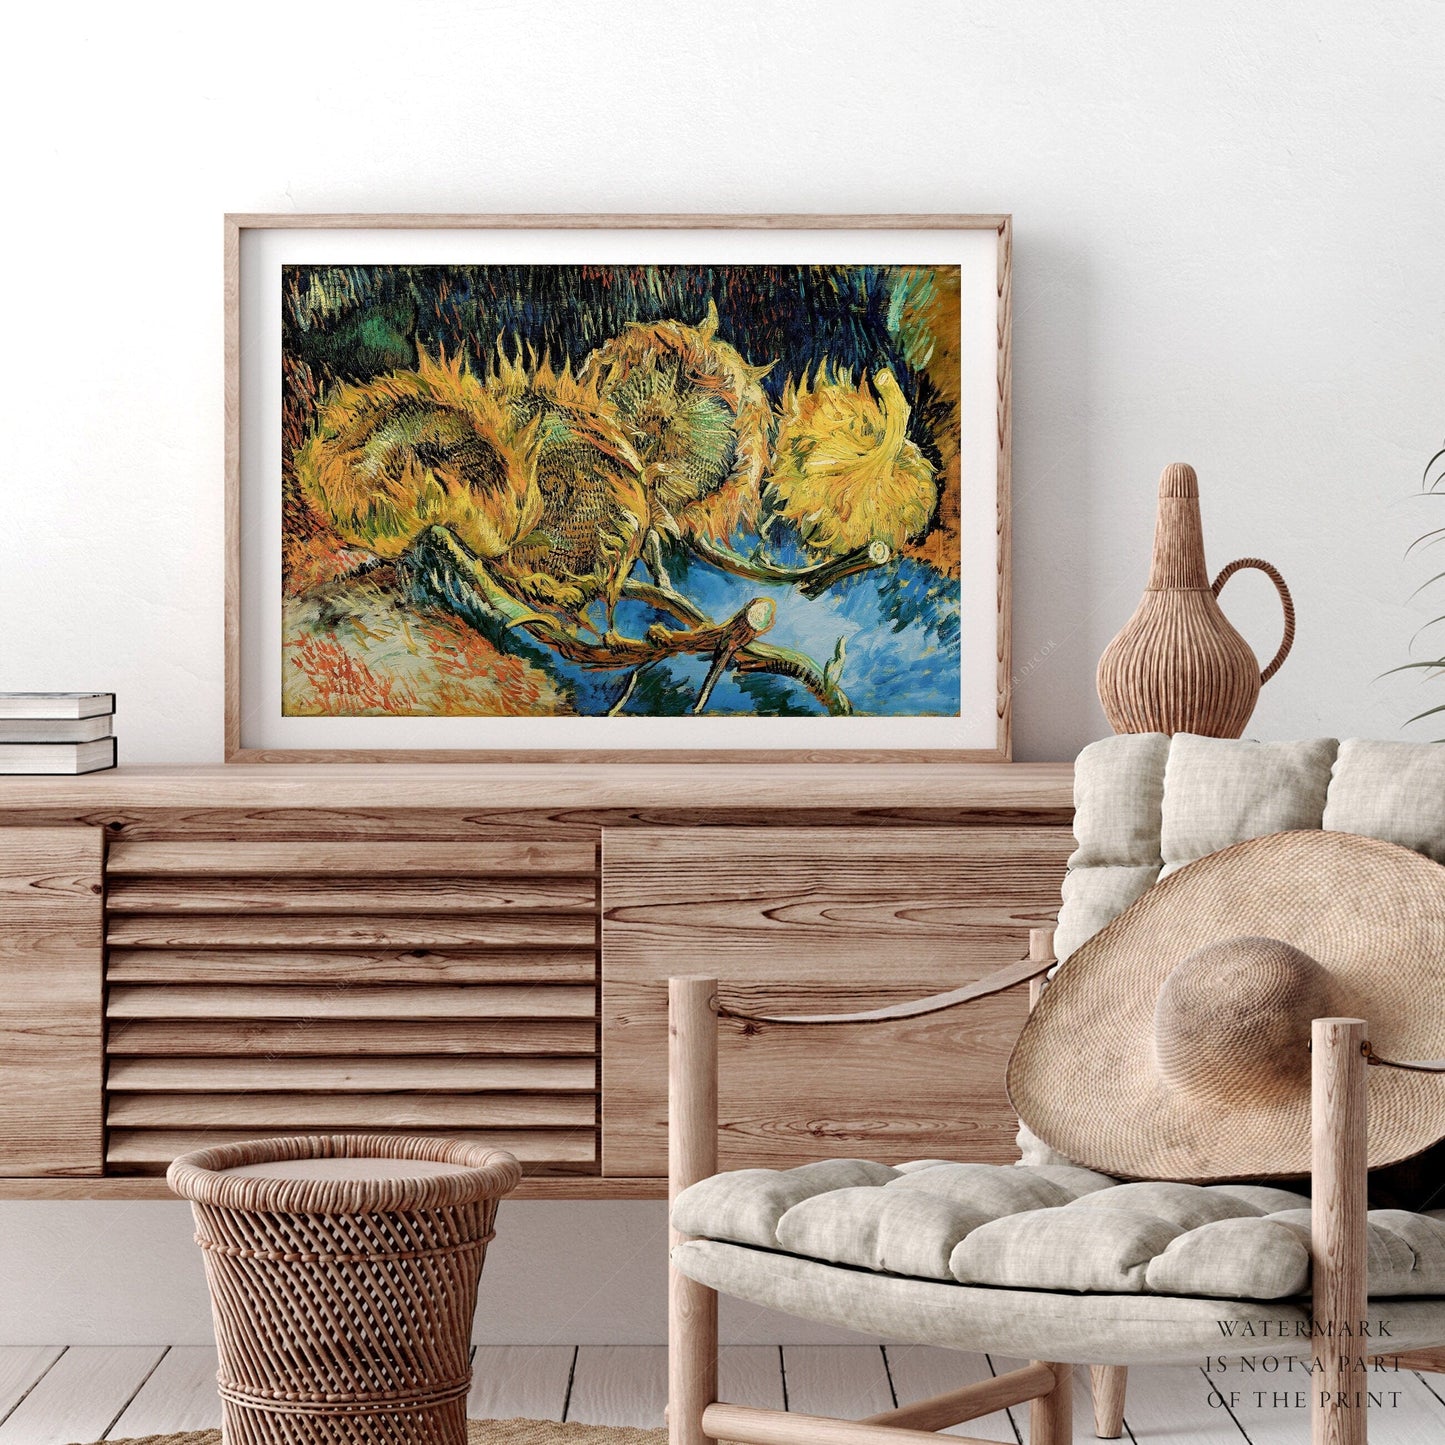 Home Poster Decor Van Gogh Print, Four sunflowers gone to seed, Landscape Art, Impressionist painter, Wedding Gift, Living Room Decor, VanGogh Reproduction 25